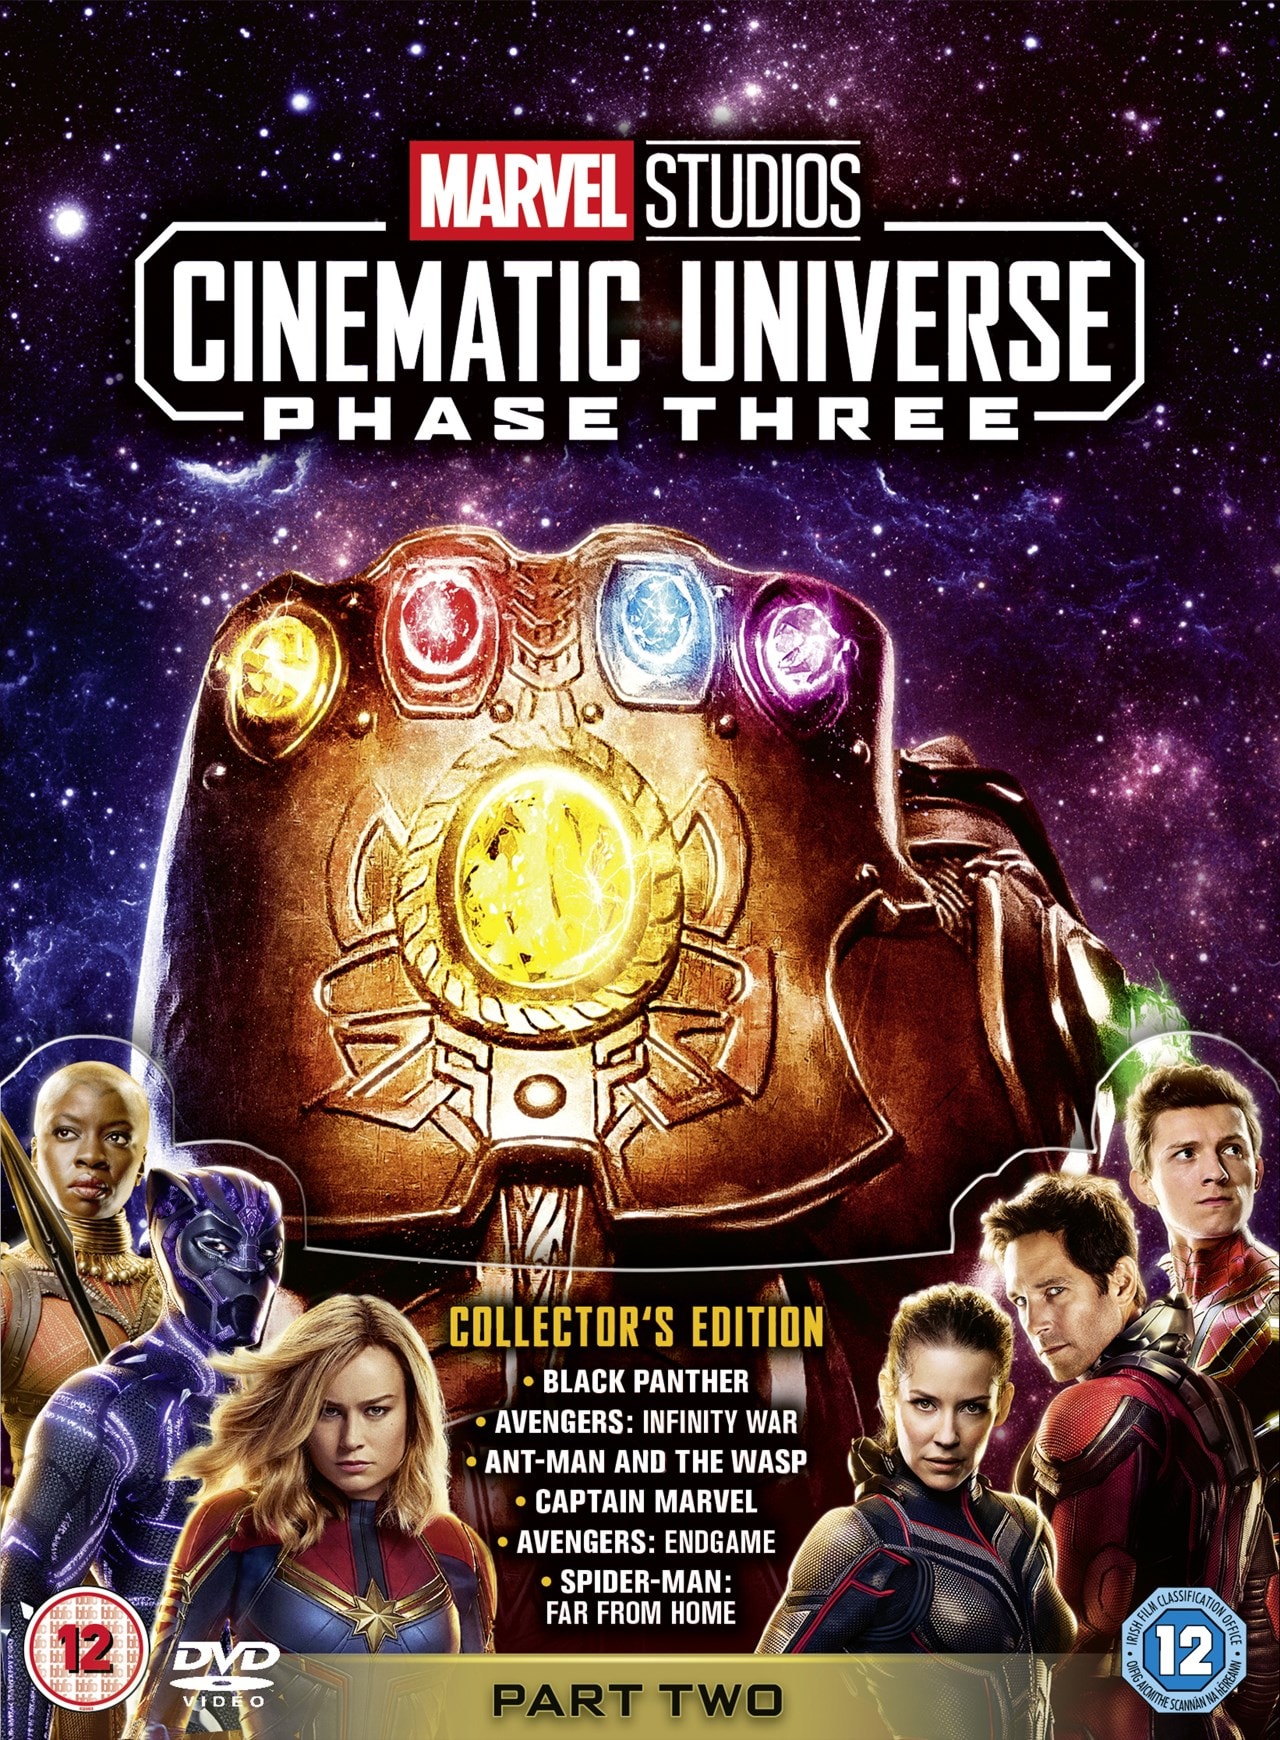 Marvel Studios Cinematic Universe Phase Three Part Two Dvd Box Set Free Shipping Over 20 Hmv Store